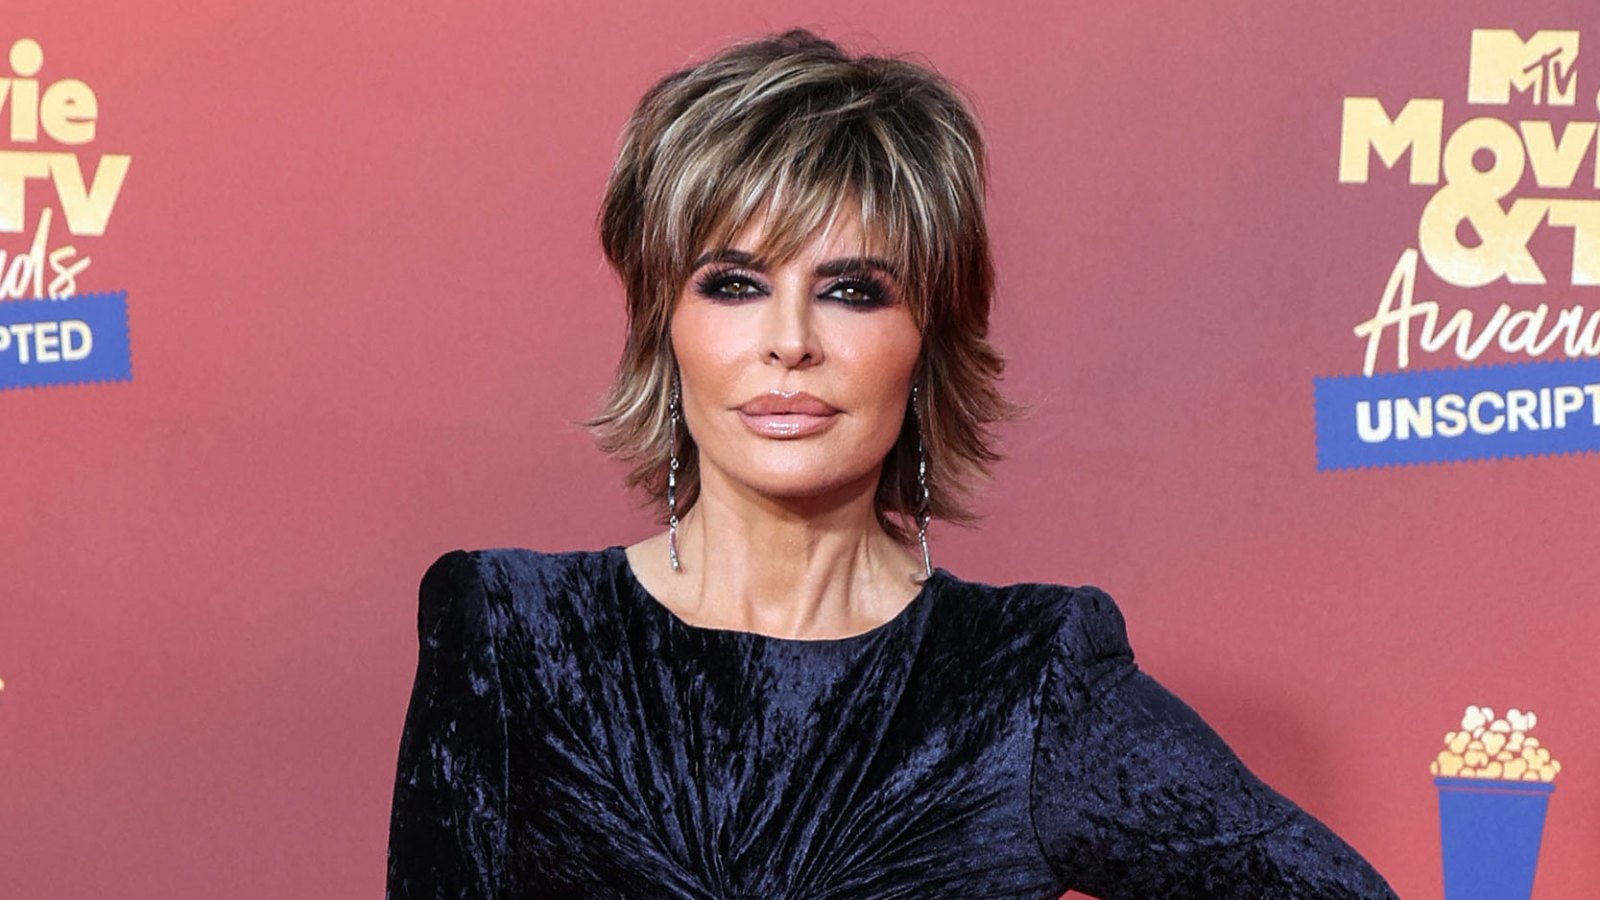 Lisa Rinna Slams Real Housewives of Beverly Hills for Not Properly Honoring Her Late Mom